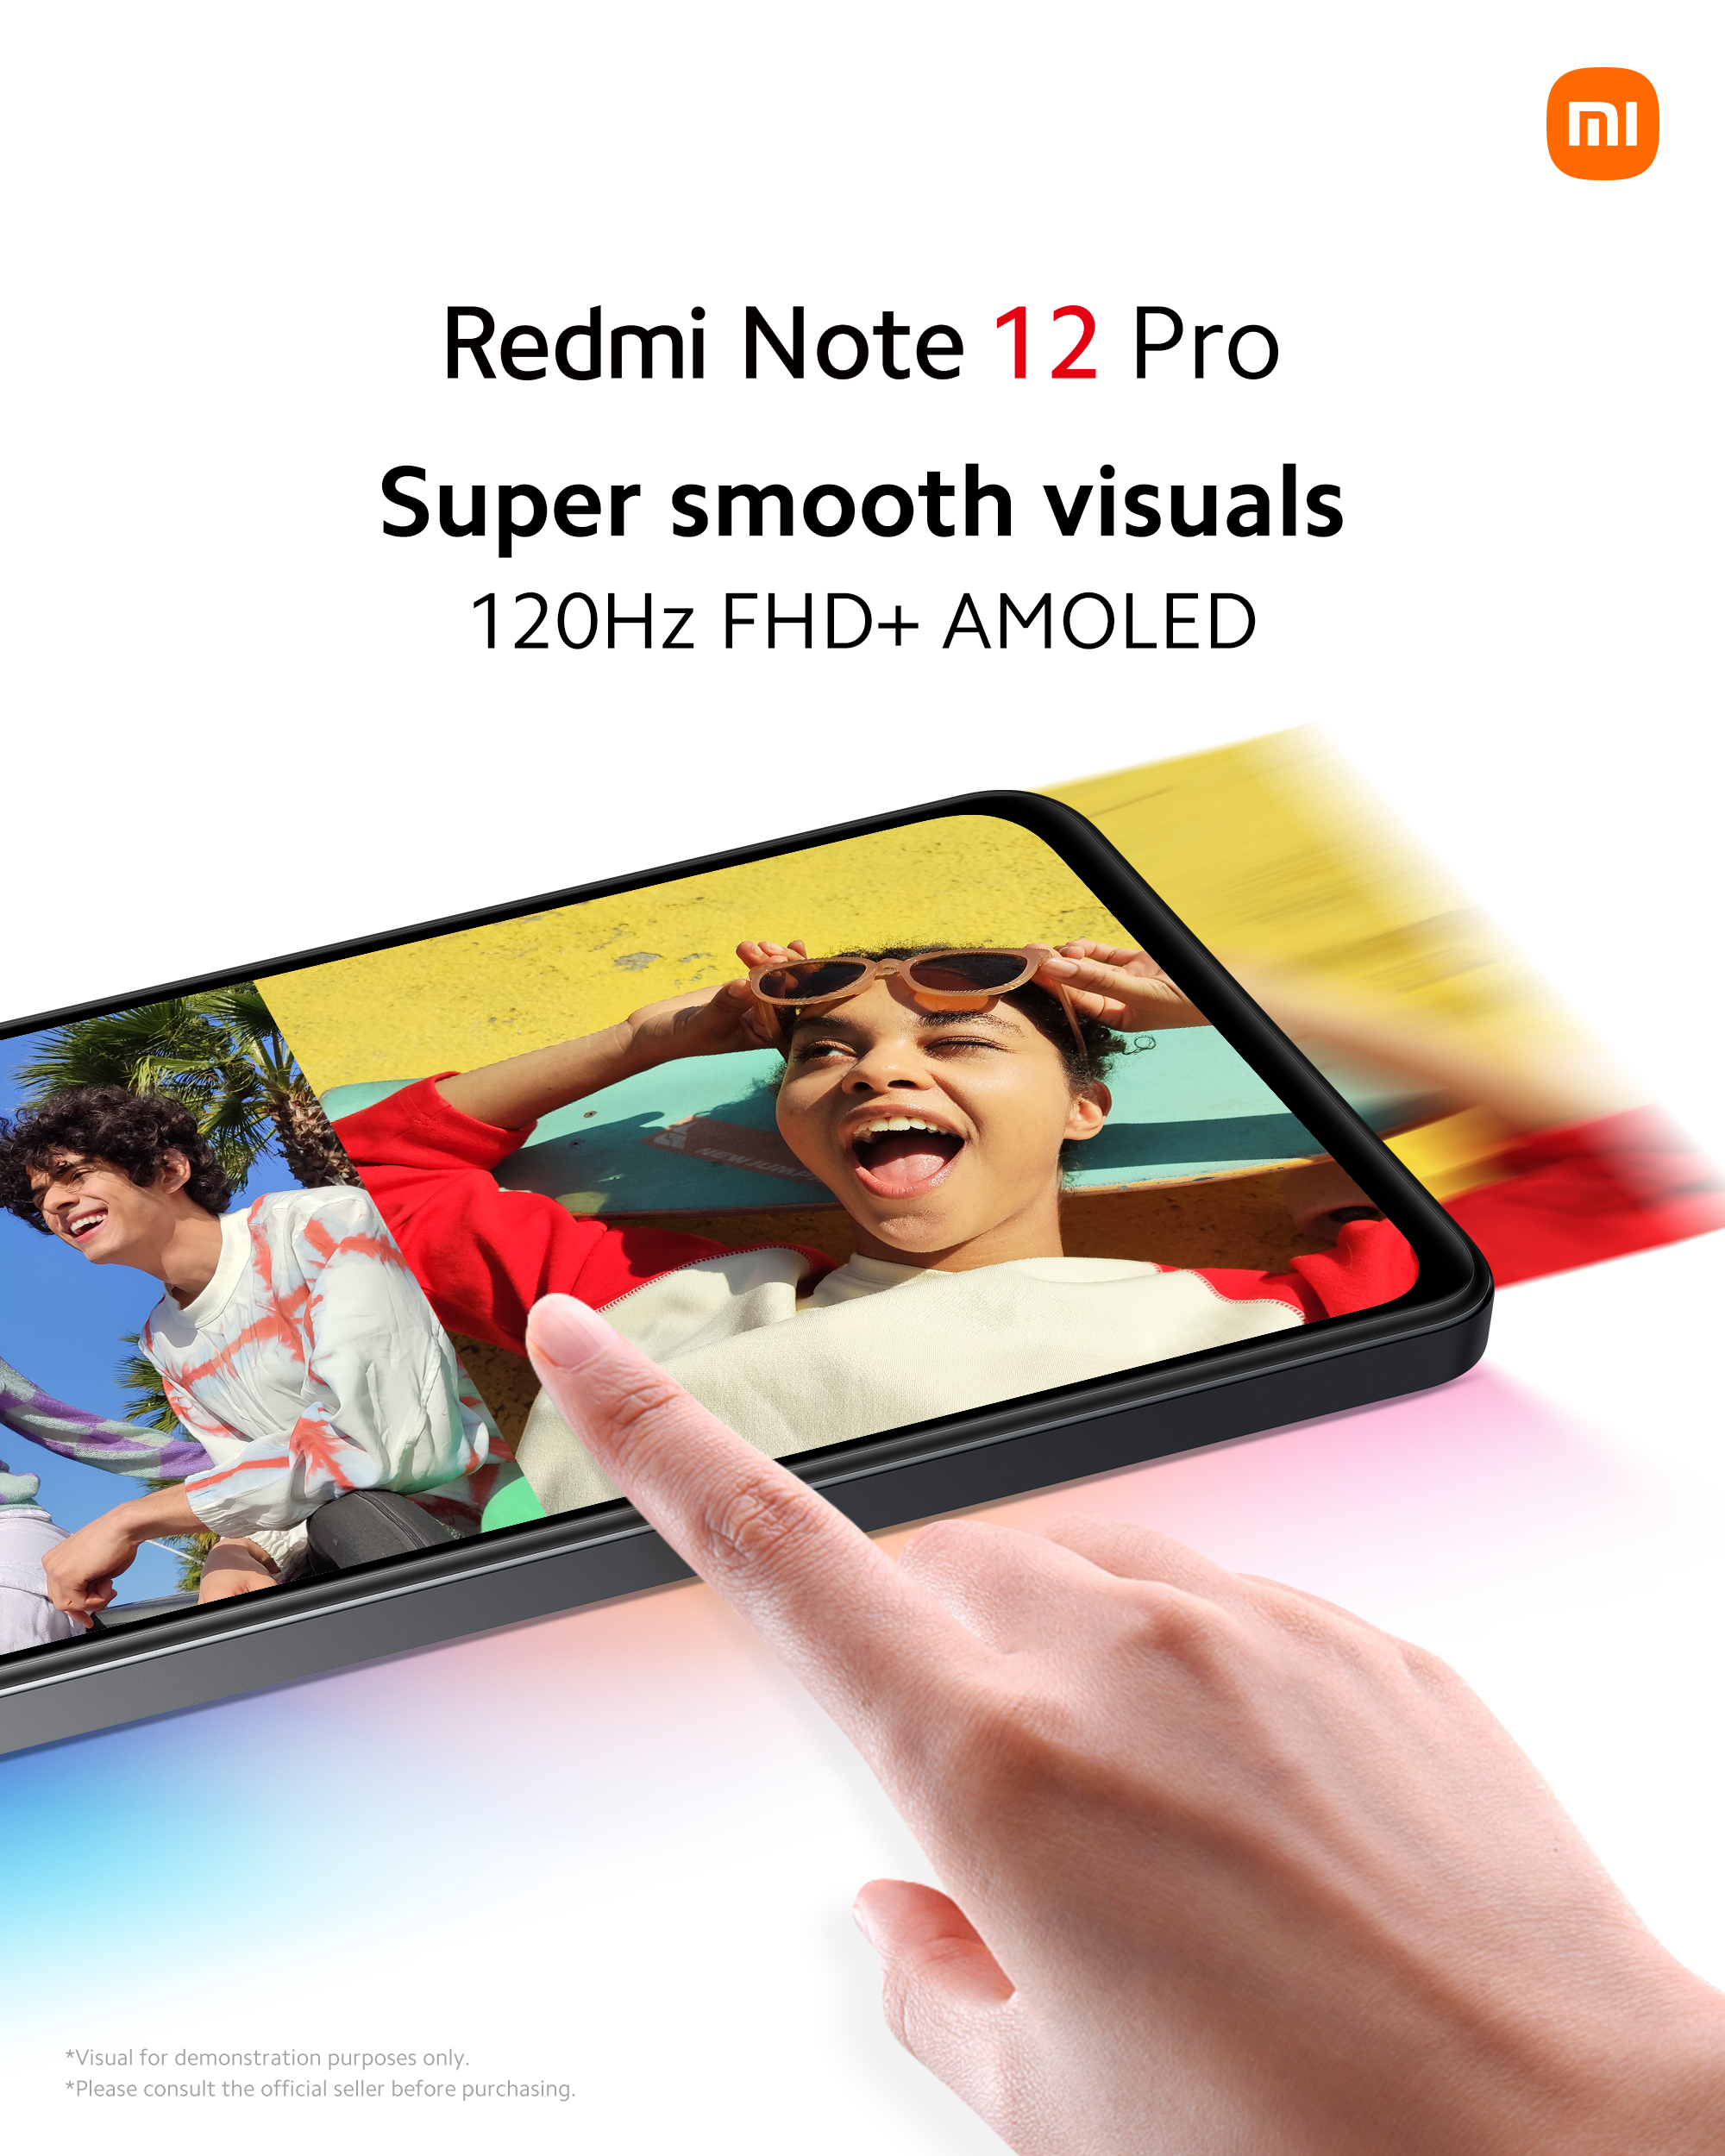 Xiaomi launches Redmi Note 12 Series in Nigeria inspiring users to live  vivid